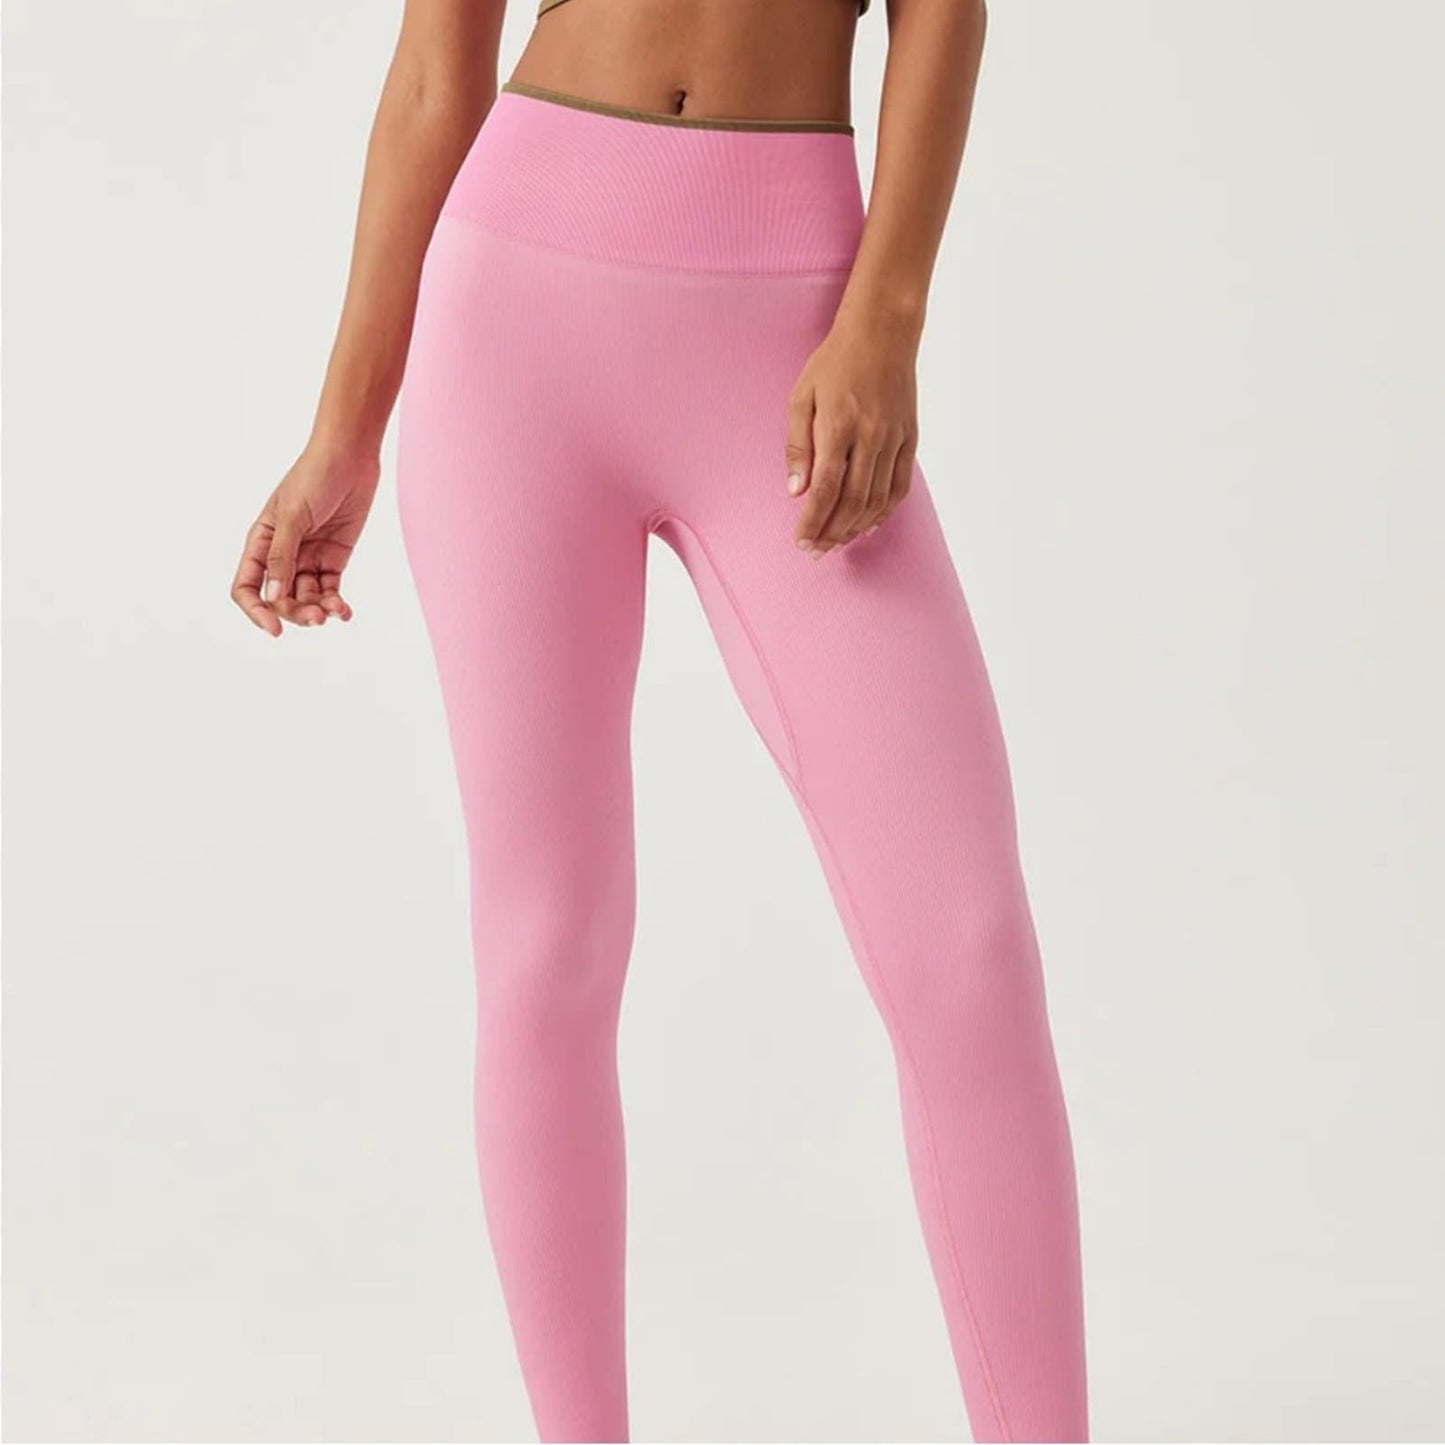 NWT Outdoor Voices Bubblegum Seamless Ribbed 7/8 Leggings M